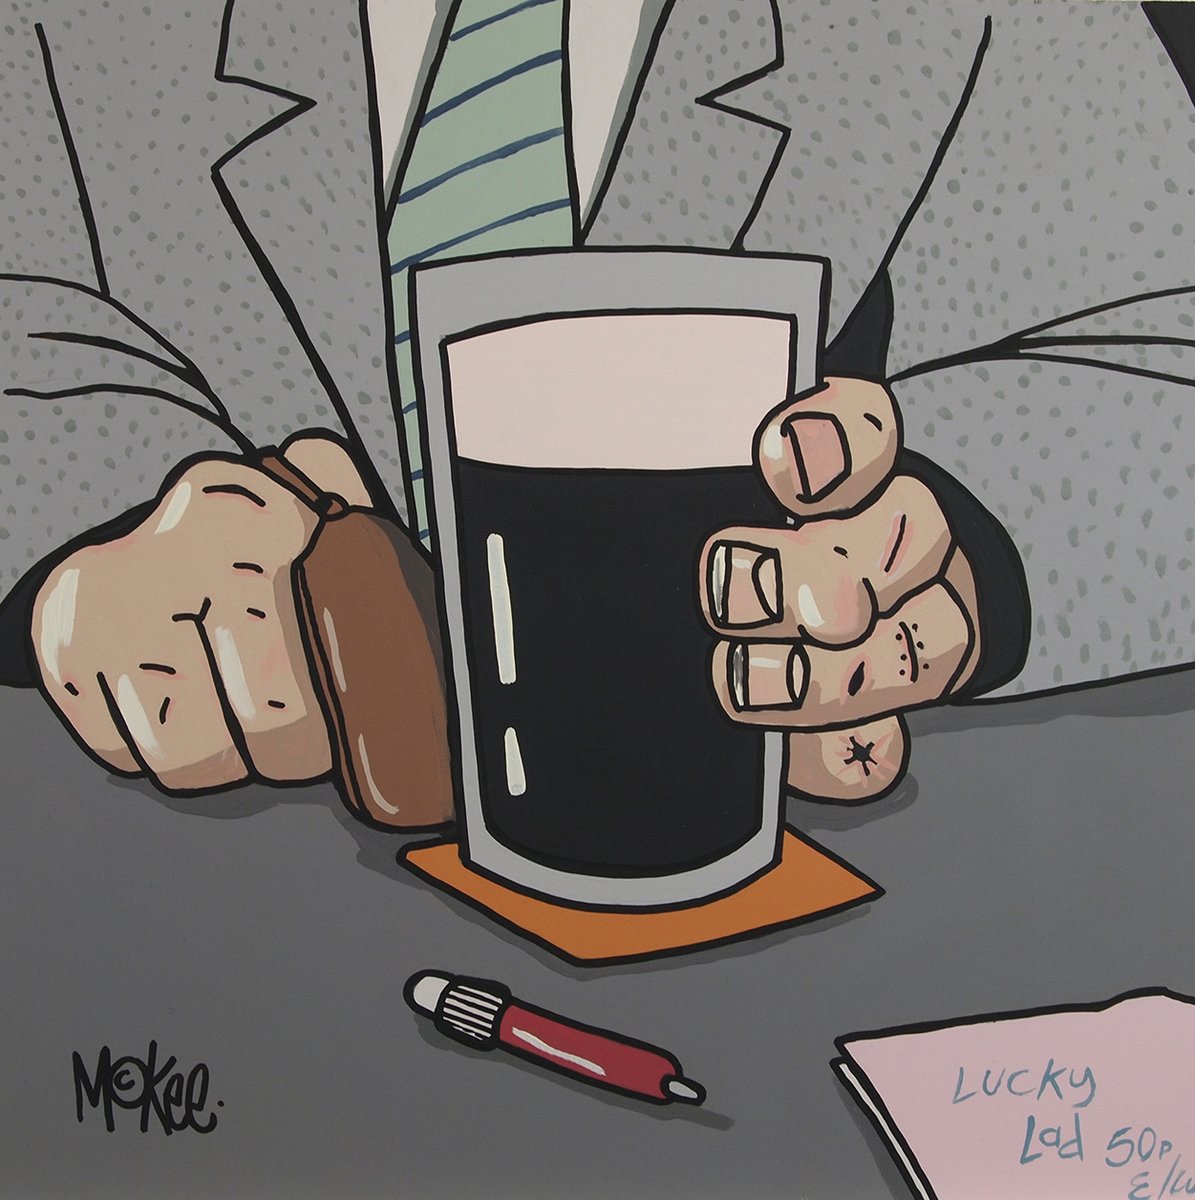 📢@PeteMcKee is looking to track down some of his key original artworks to form part of a major new exhibition at Weston Park Museum this autumn and needs your help! 📢 Find out more 👇sheffieldmuseums.org.uk/news/pete-mcke…